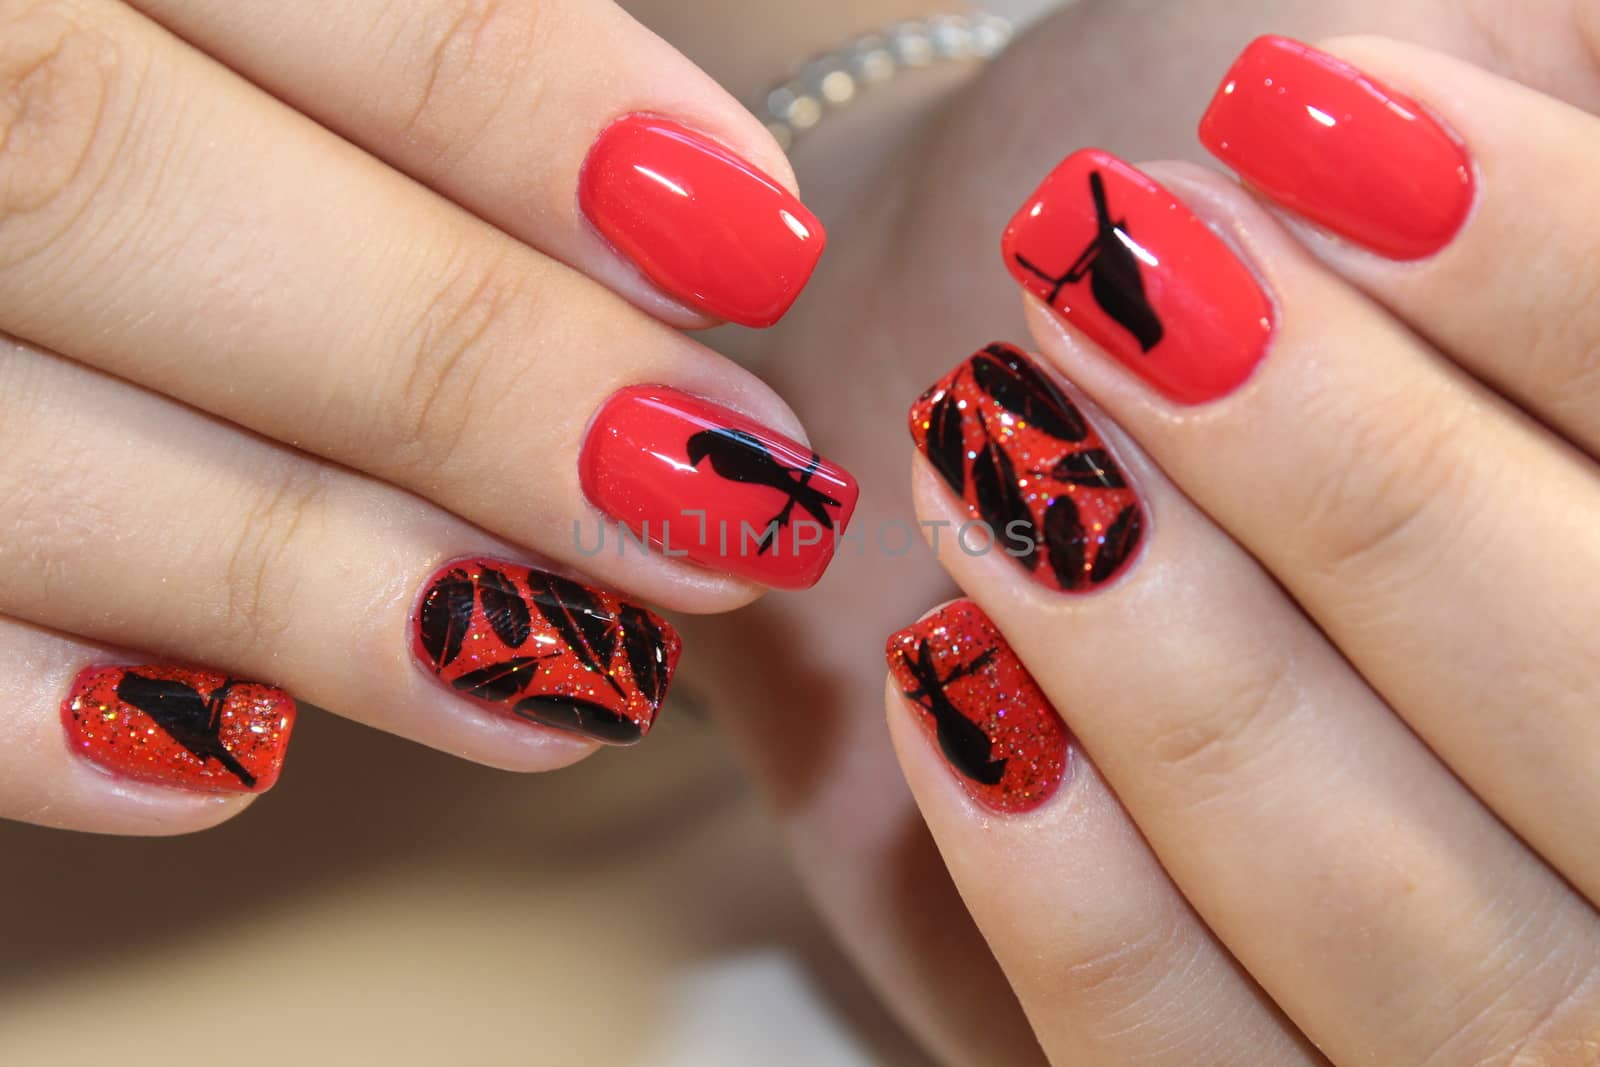 Manicure design red nails by SmirMaxStock